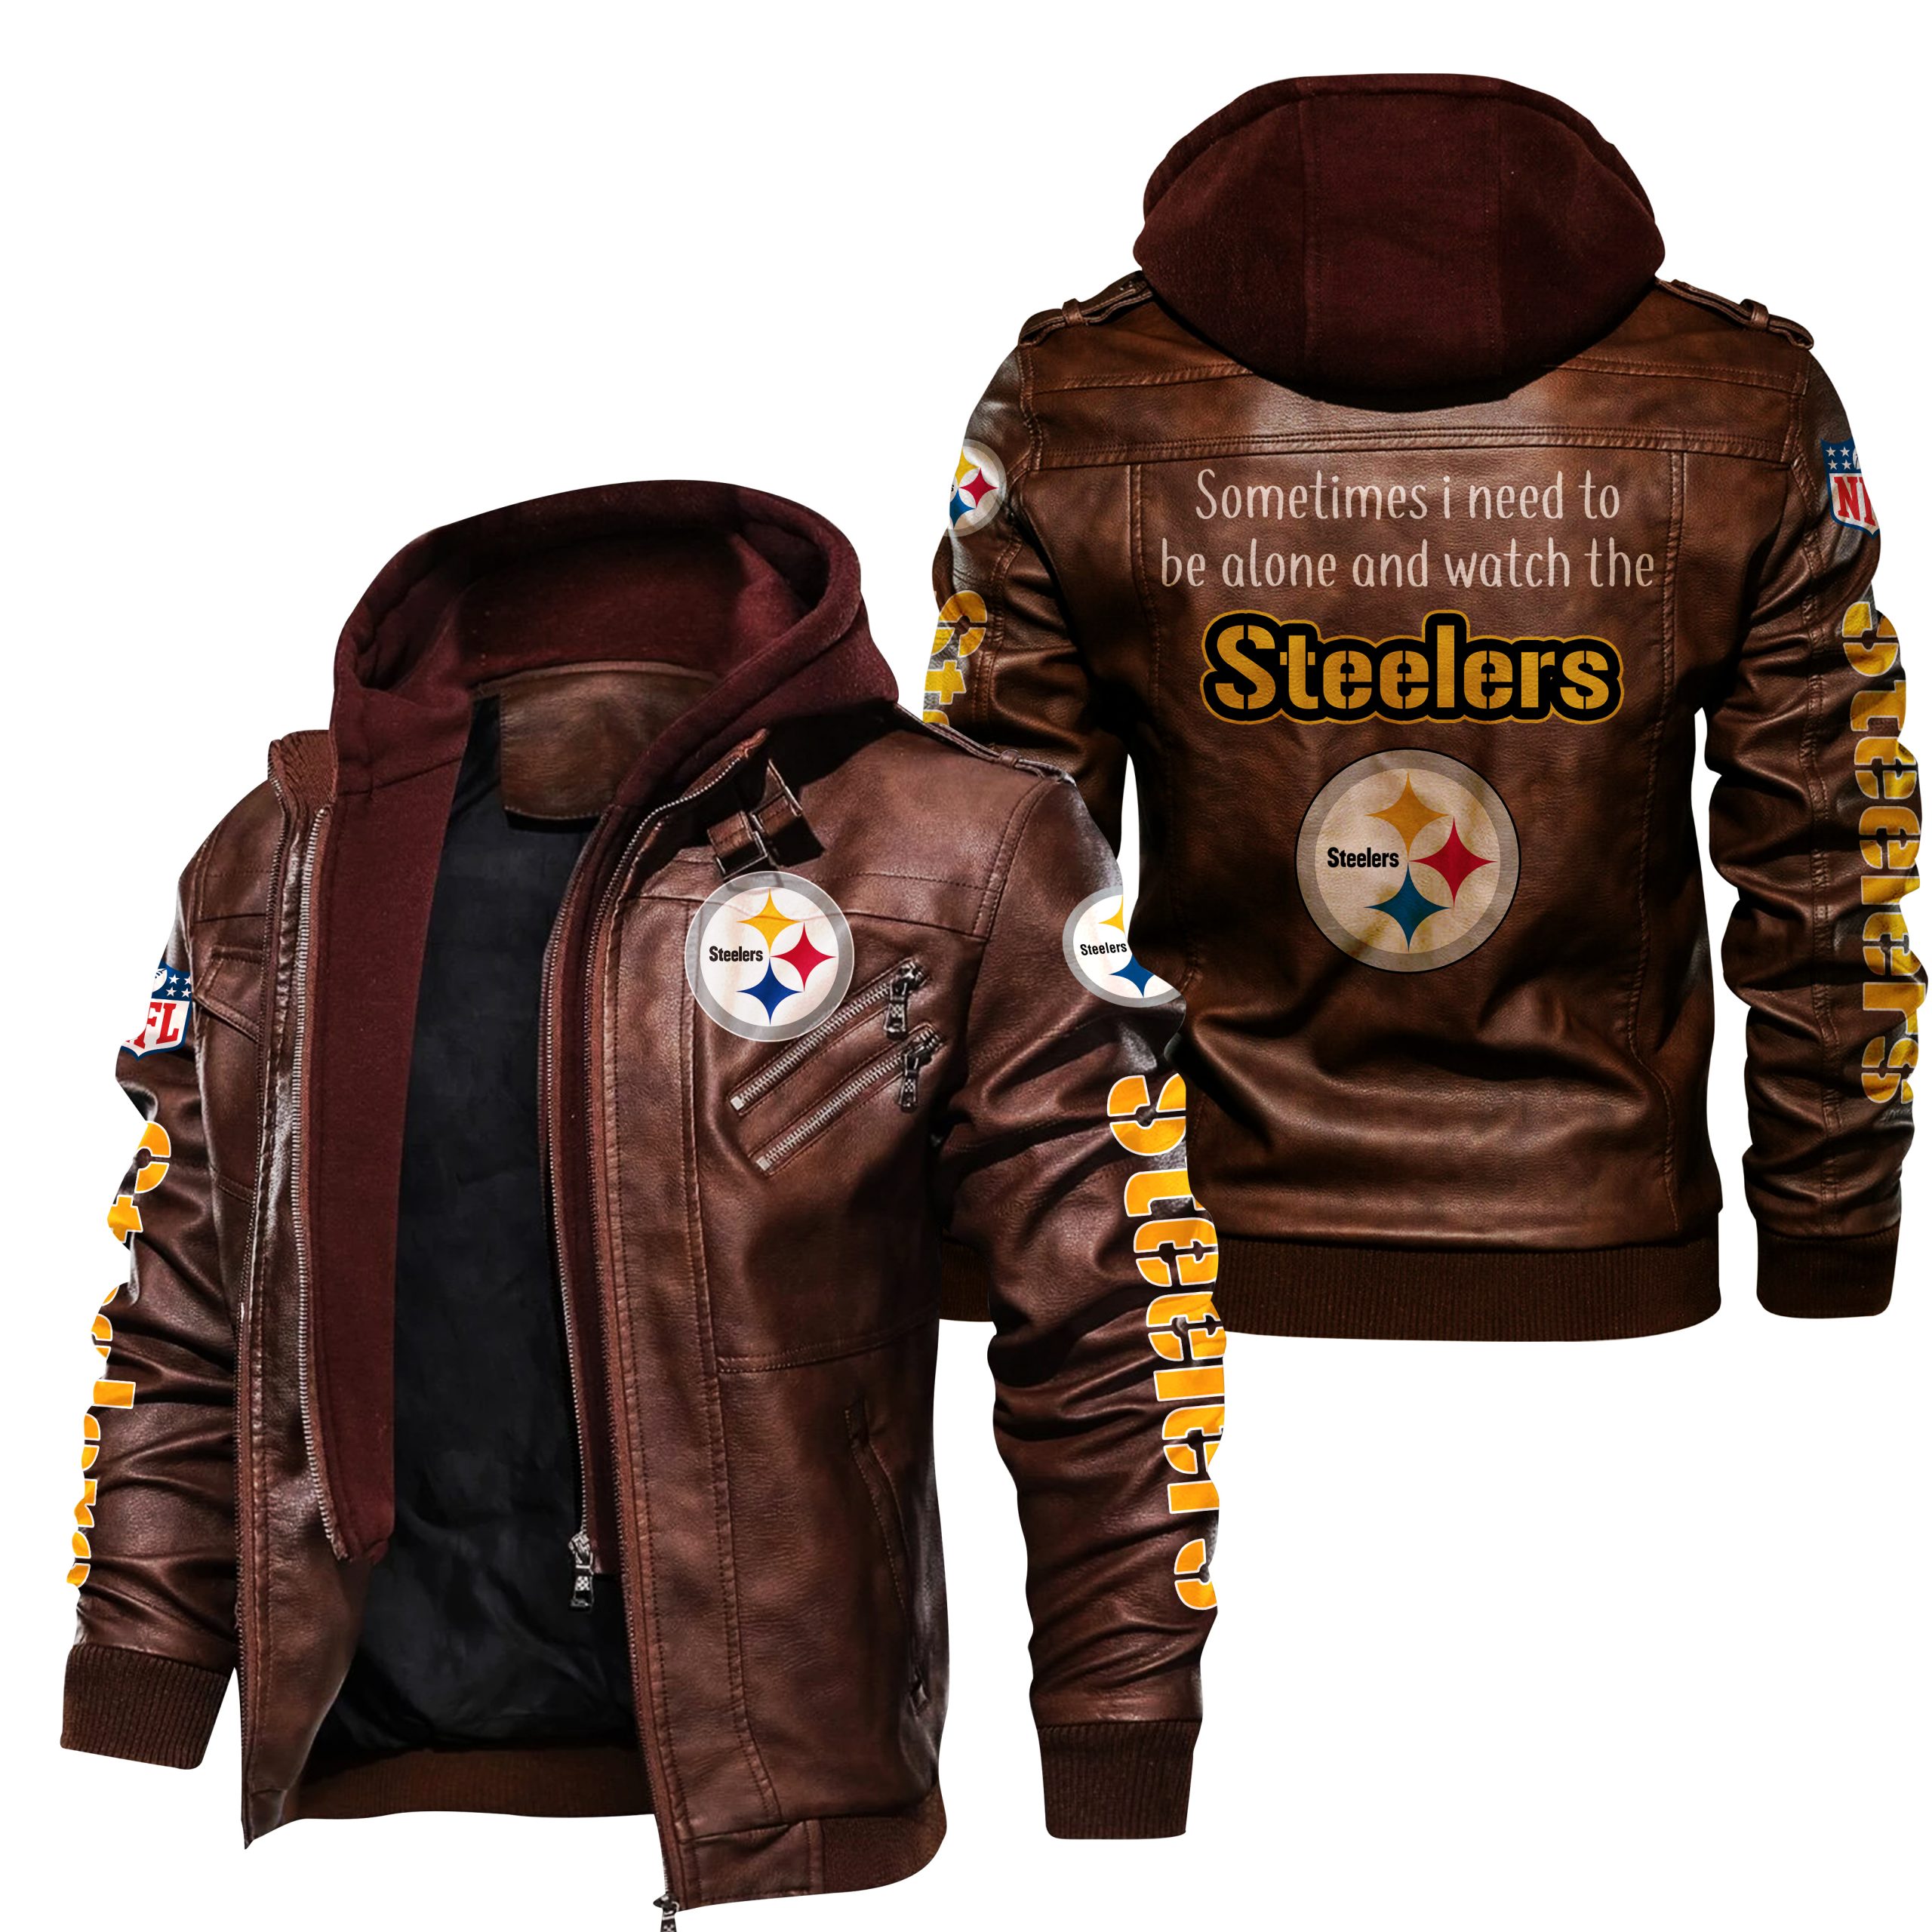 pittsburgh steelers hvkc407 browns leather jacket